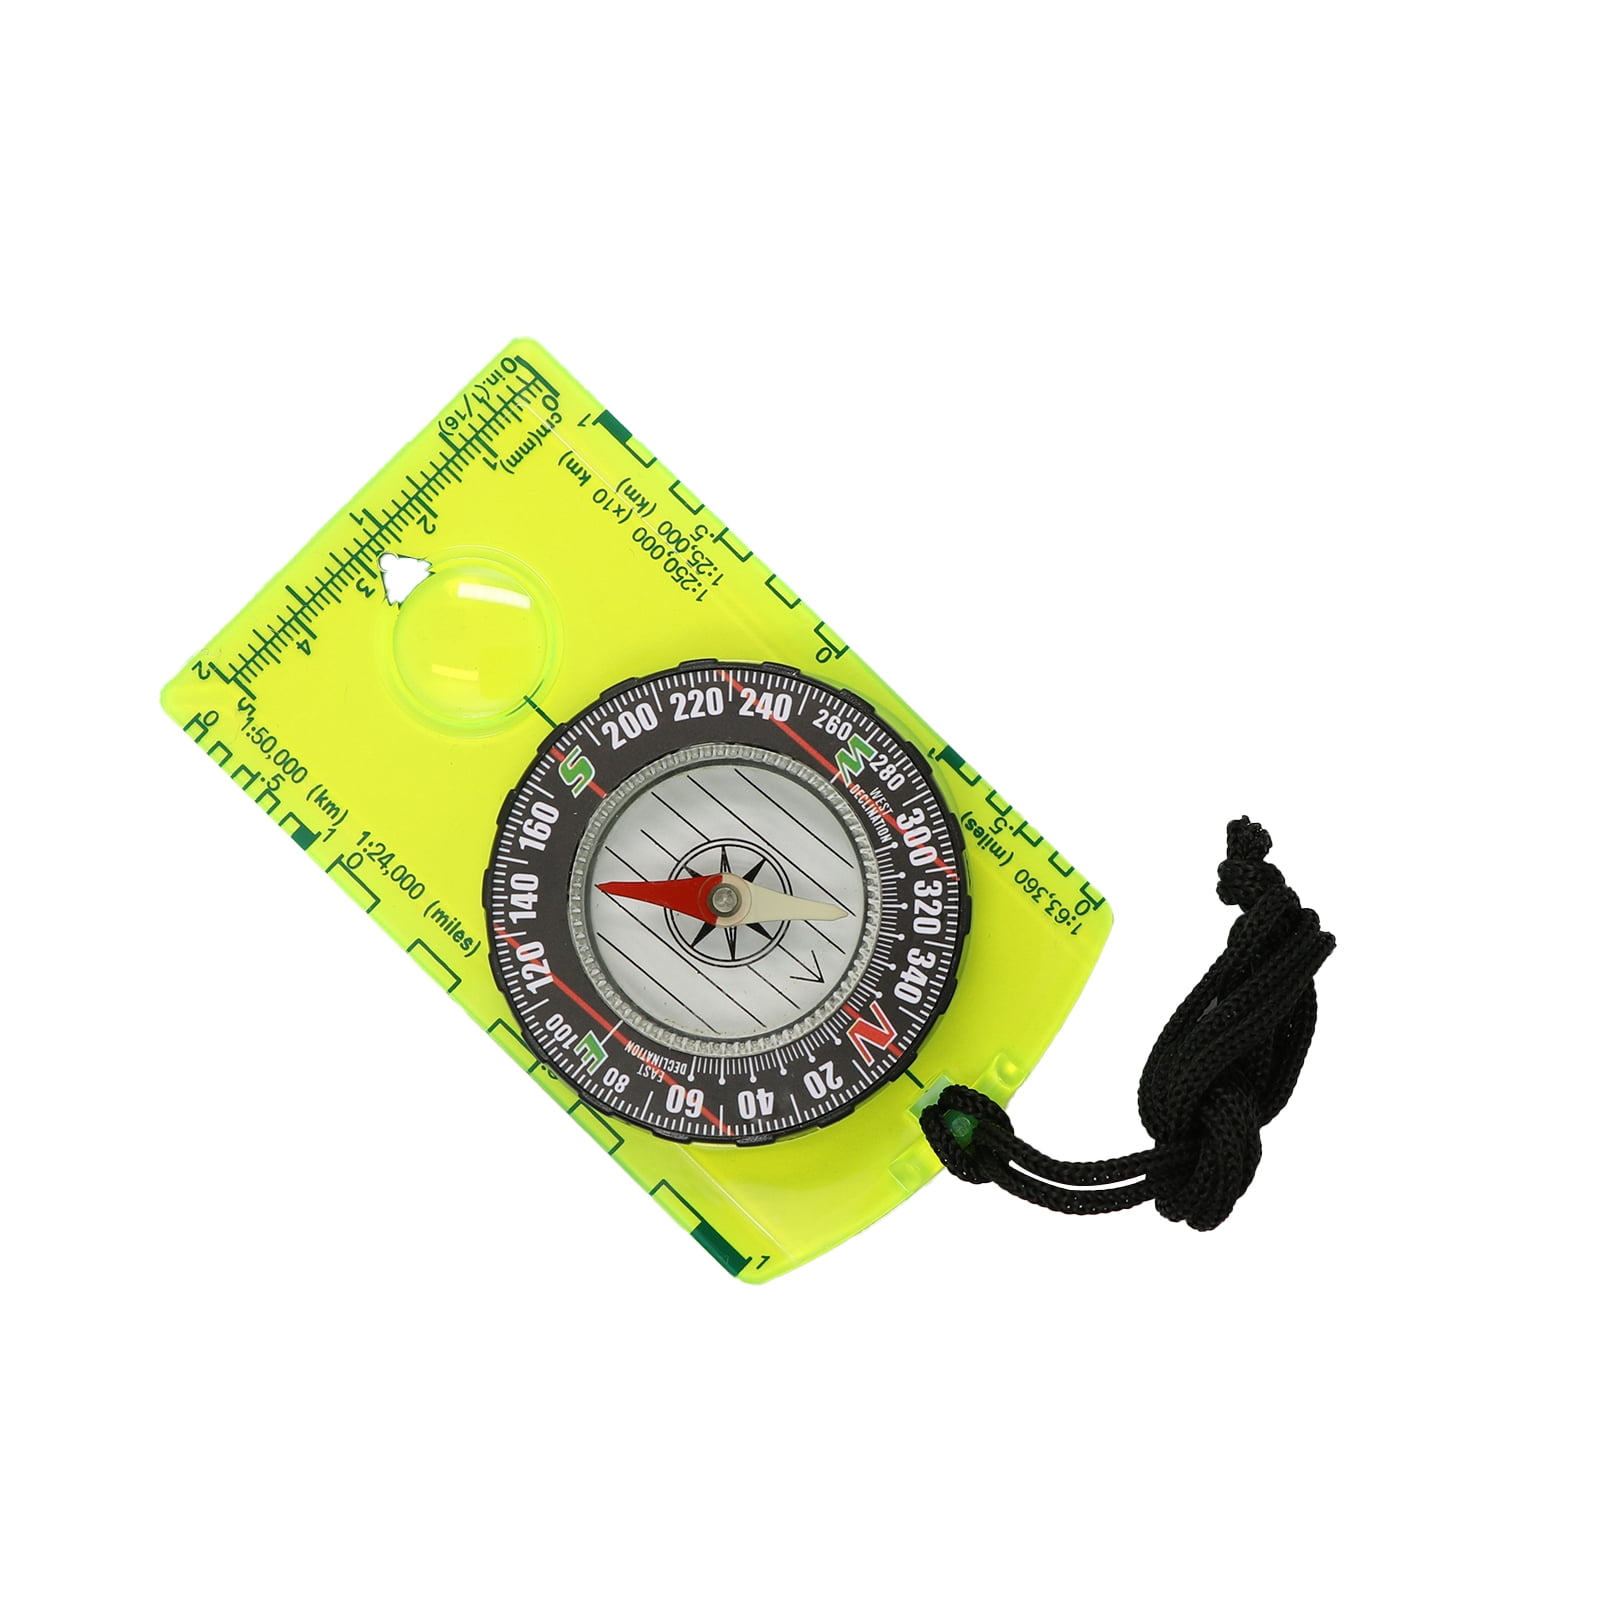 QUALITY BASEPLATE COMPASS IN MLS AND DEGREES HIKING ORIENTEERING CAMPING SCOUTS 